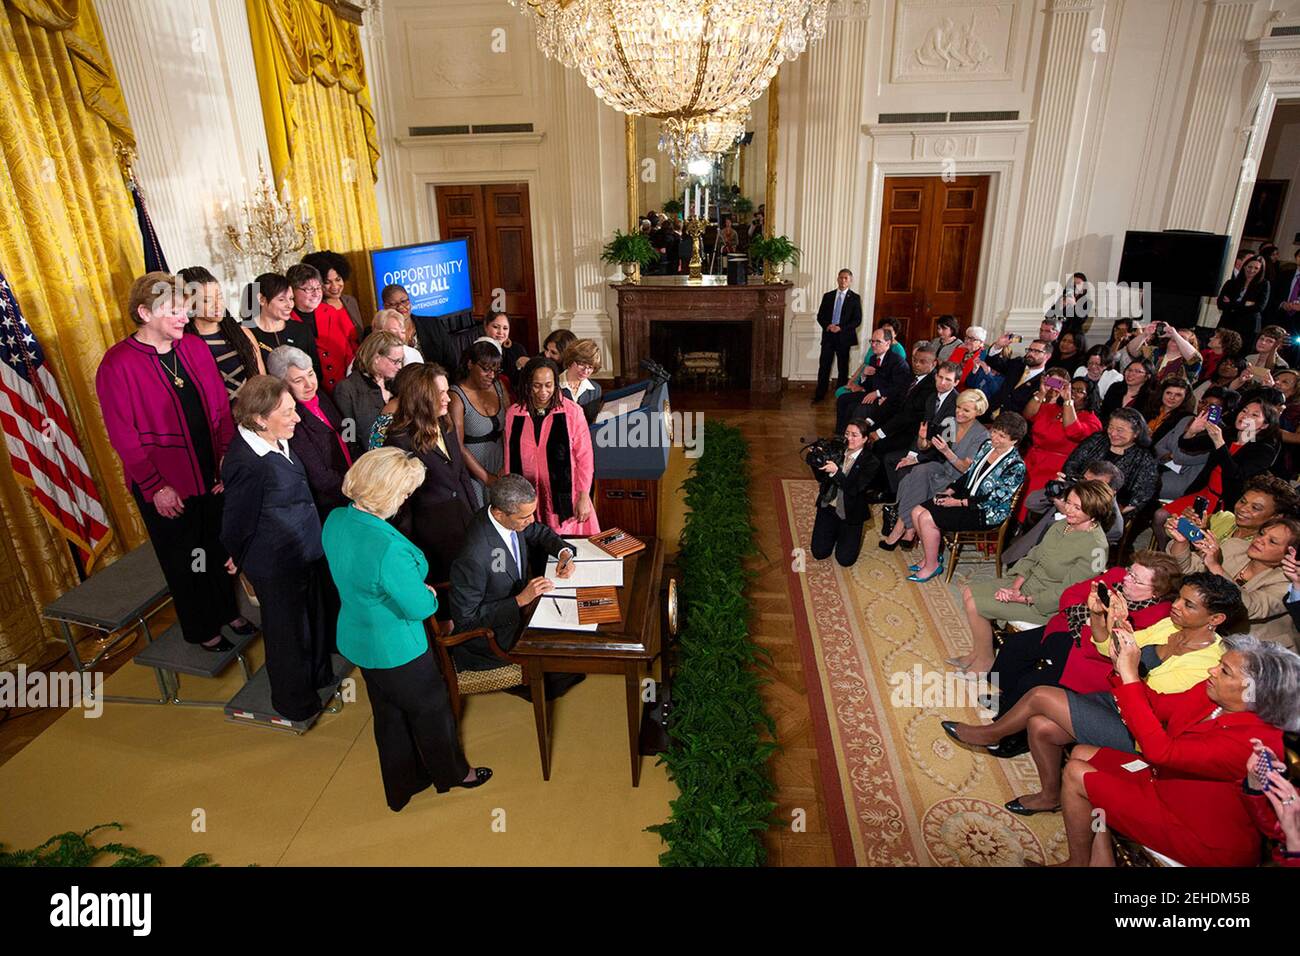 President Barack Obama signs executive actions to strengthen enforcement of equal pay laws for women, at an event marking Equal Pay Day in the East Room of the White House, April 8, 2014. The President signs the Presidential Memorandum -- Advancing Pay Equality Through Compensation Data Collection, and an Executive Order regarding Non-Retaliation for Disclosure of Compensation Information. Lilly Ledbetter stands to the left of the signing table. Stock Photo